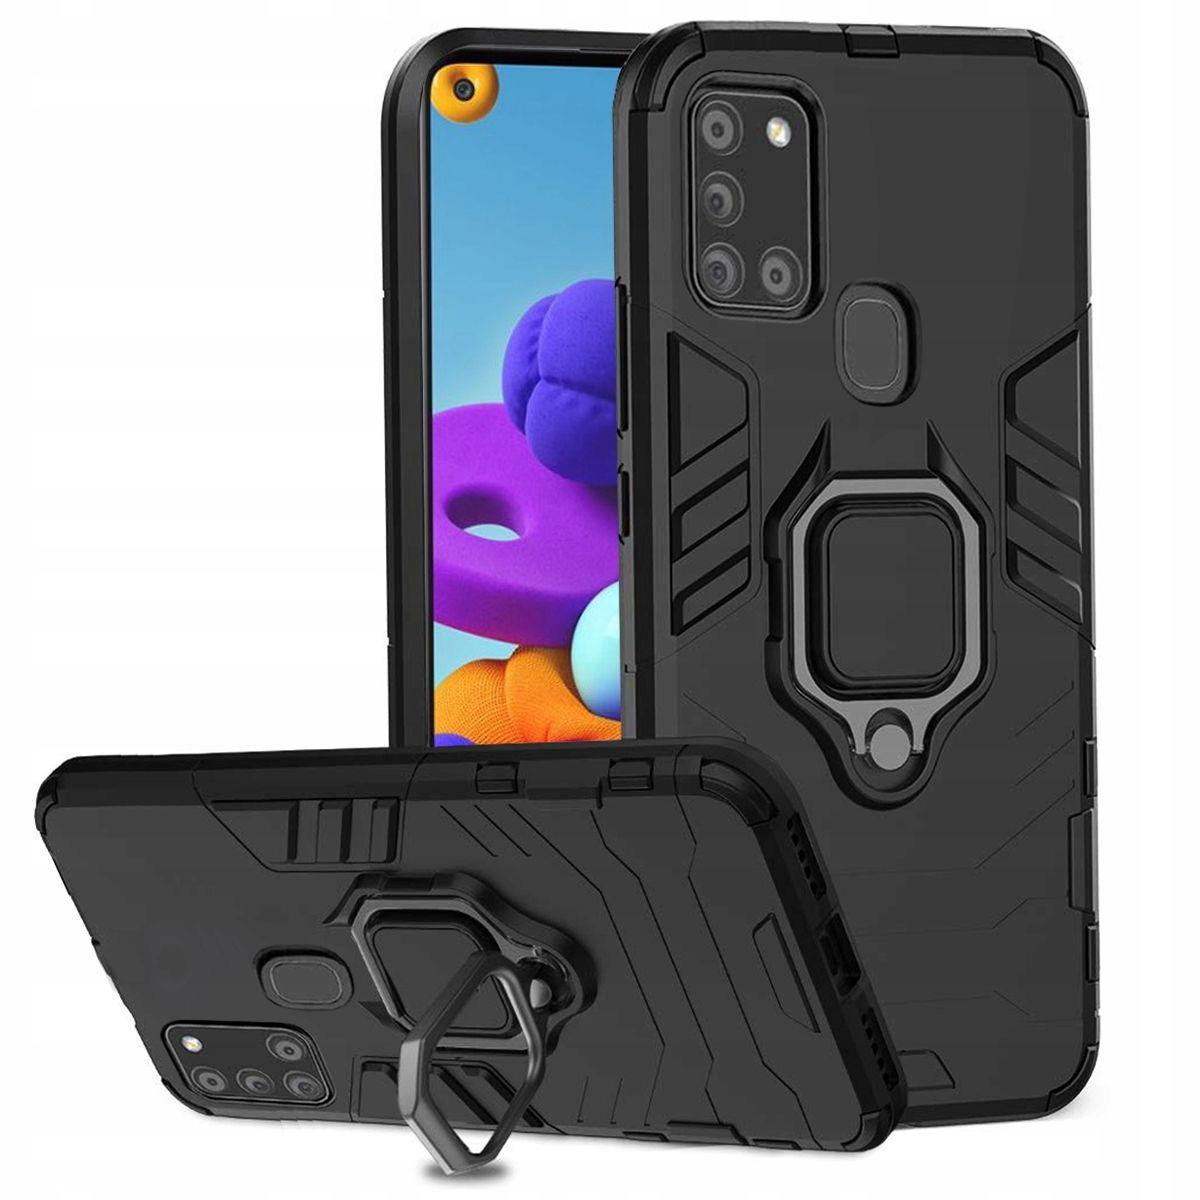 Armored case holder ring Samsung A21s (SM-A217) black